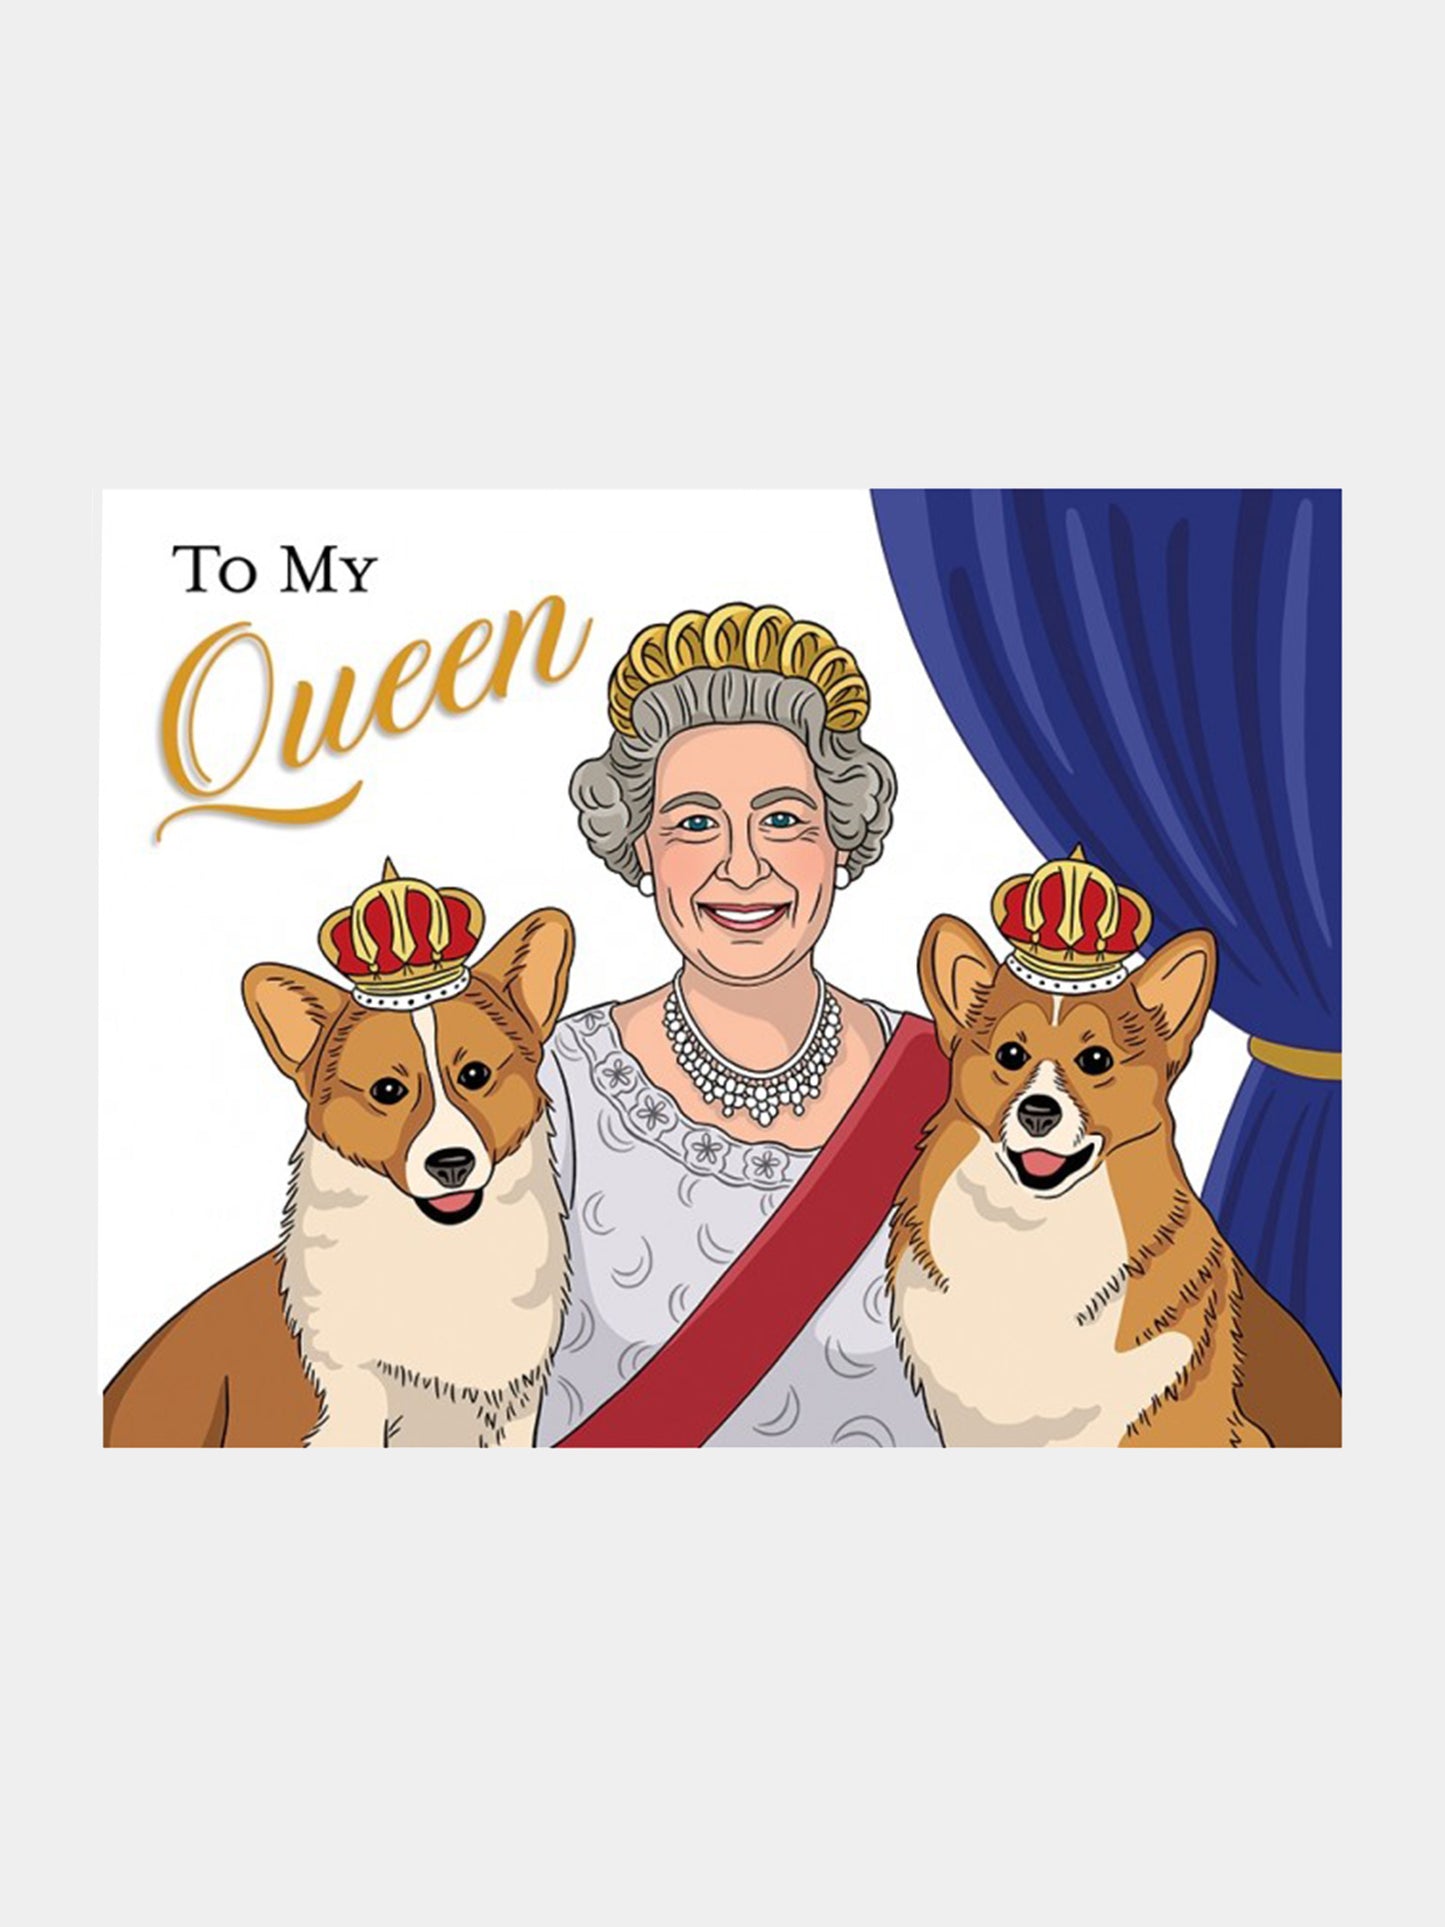 The Found Queen of England Mother's Day Greeting Card